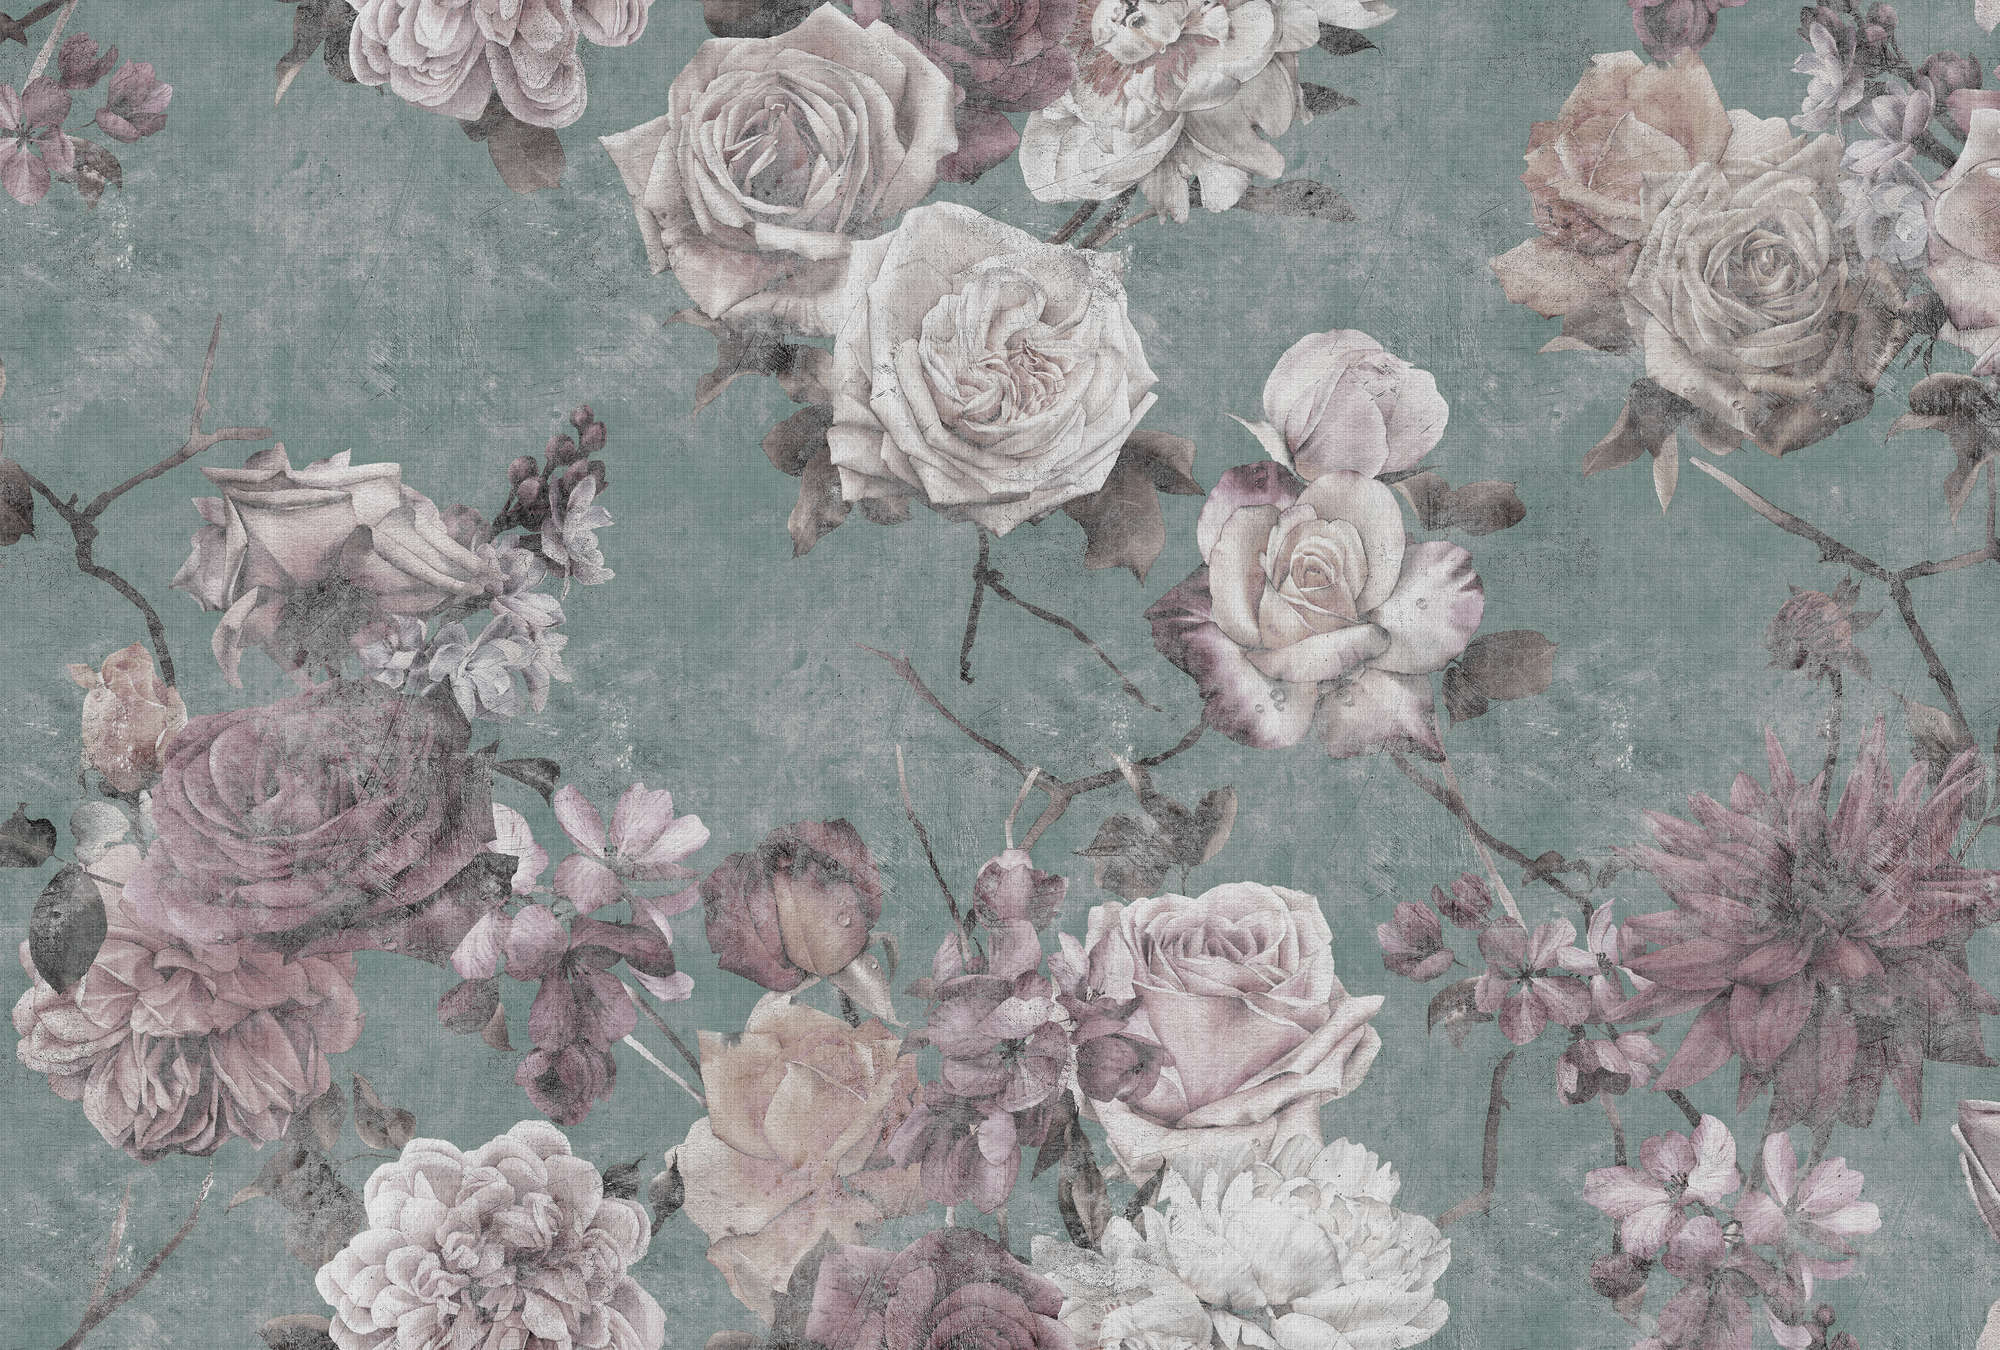             Sleeping Beauty 2 - Vintage Style Rose Blossoms Wallpaper - Nature Linen Texture - Pink, Turquoise | Pearl Smooth Non-woven
        